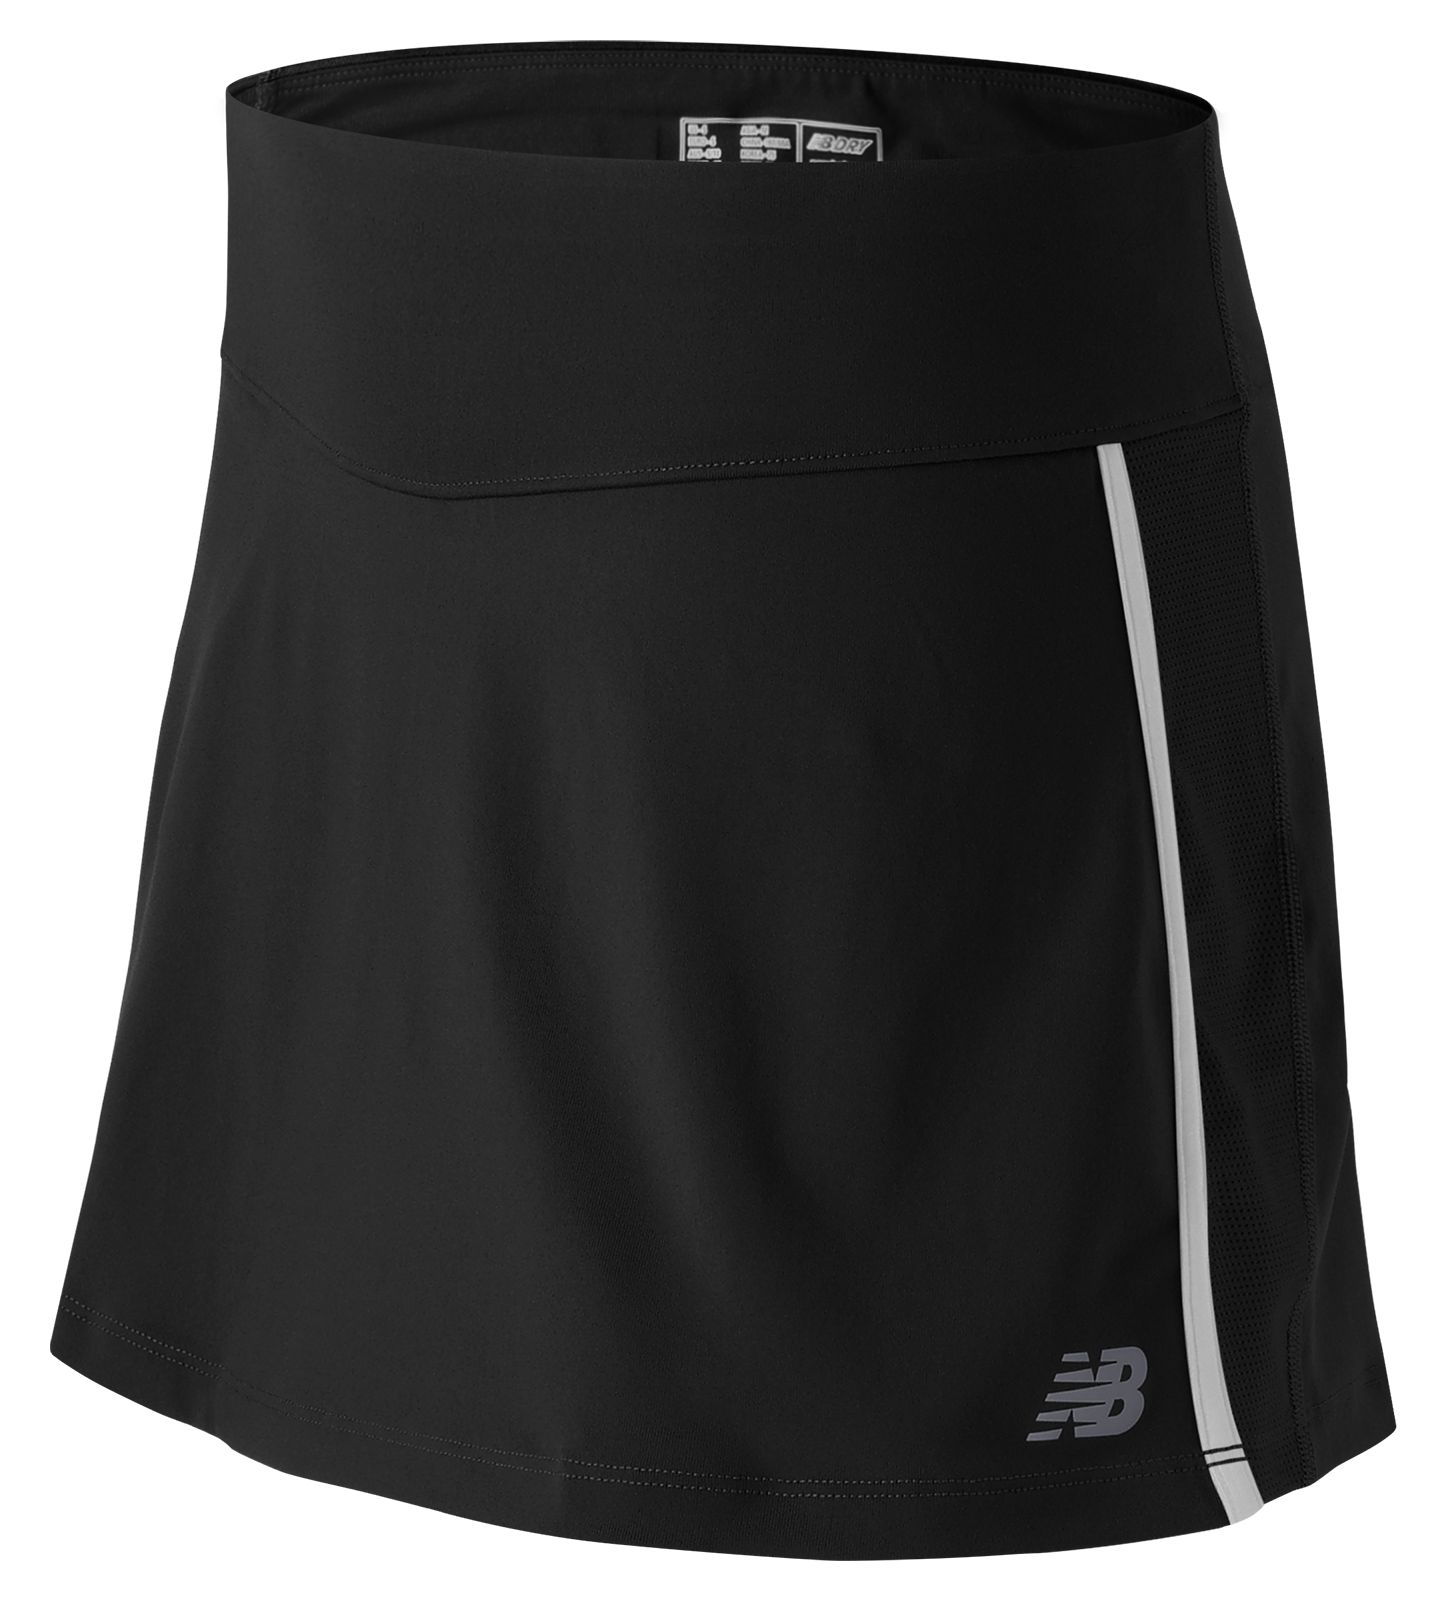 Women's Tennis Gear - Tennis Shoes, Clothing and Accessories - New Balance